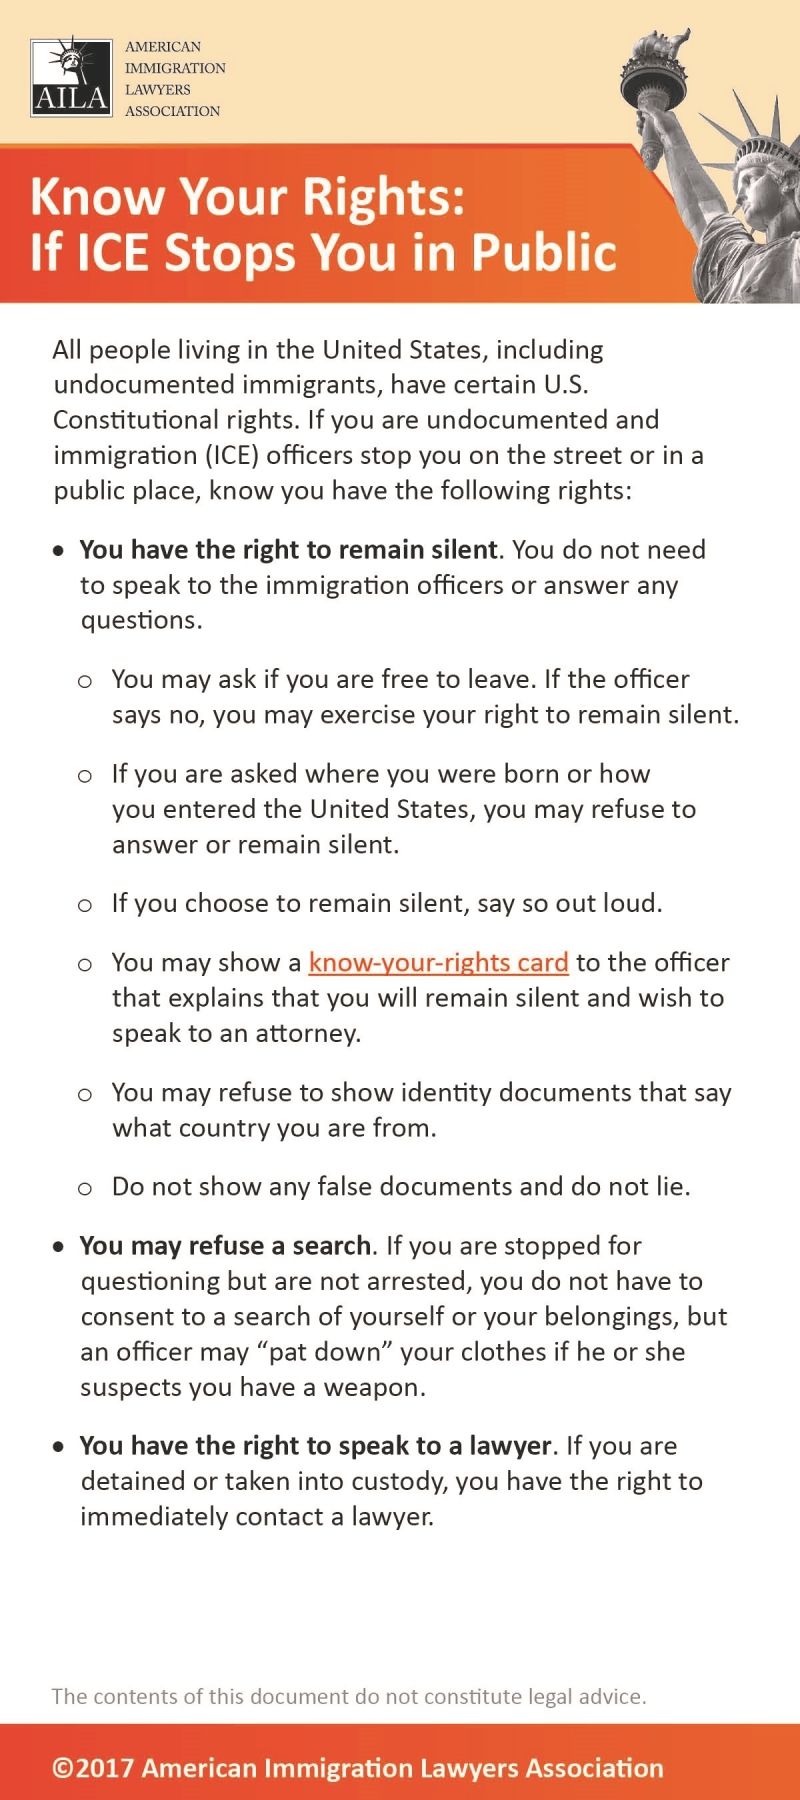 Know Your Rights: If ICE Stops You in Public